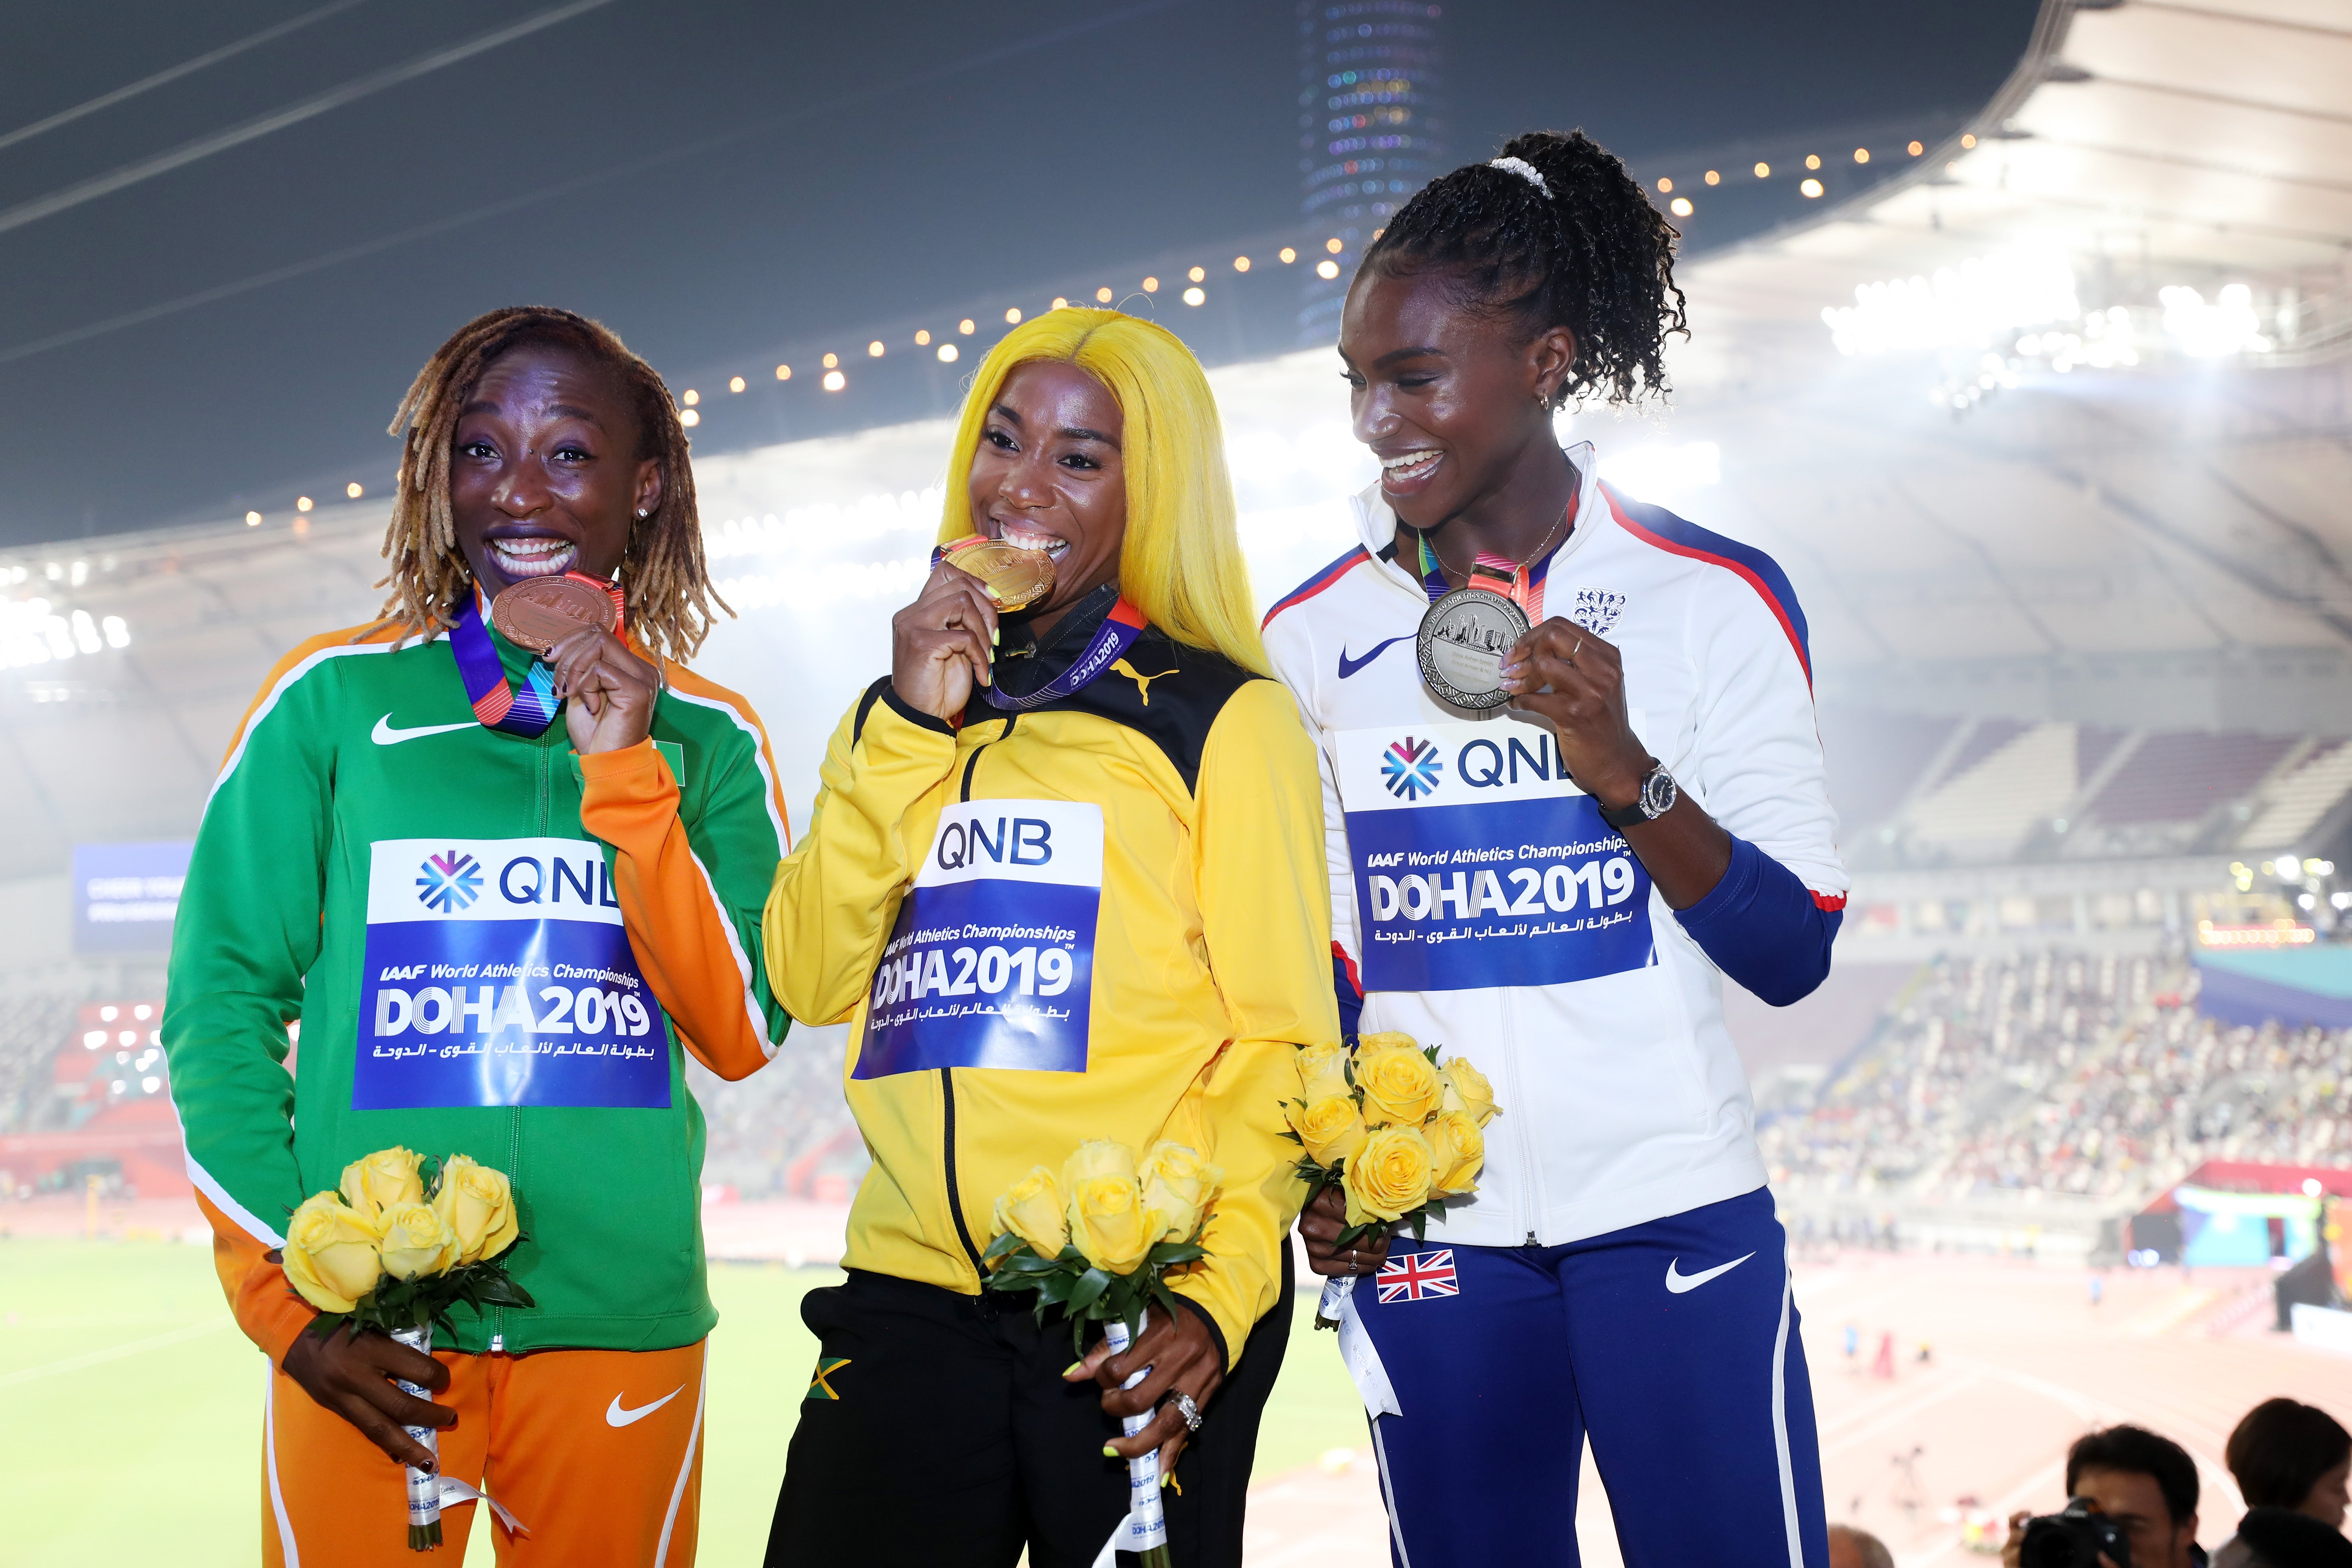 Fraser-Price will battle with Team GB’s Dina Asher-Smith (right) in Tokyo